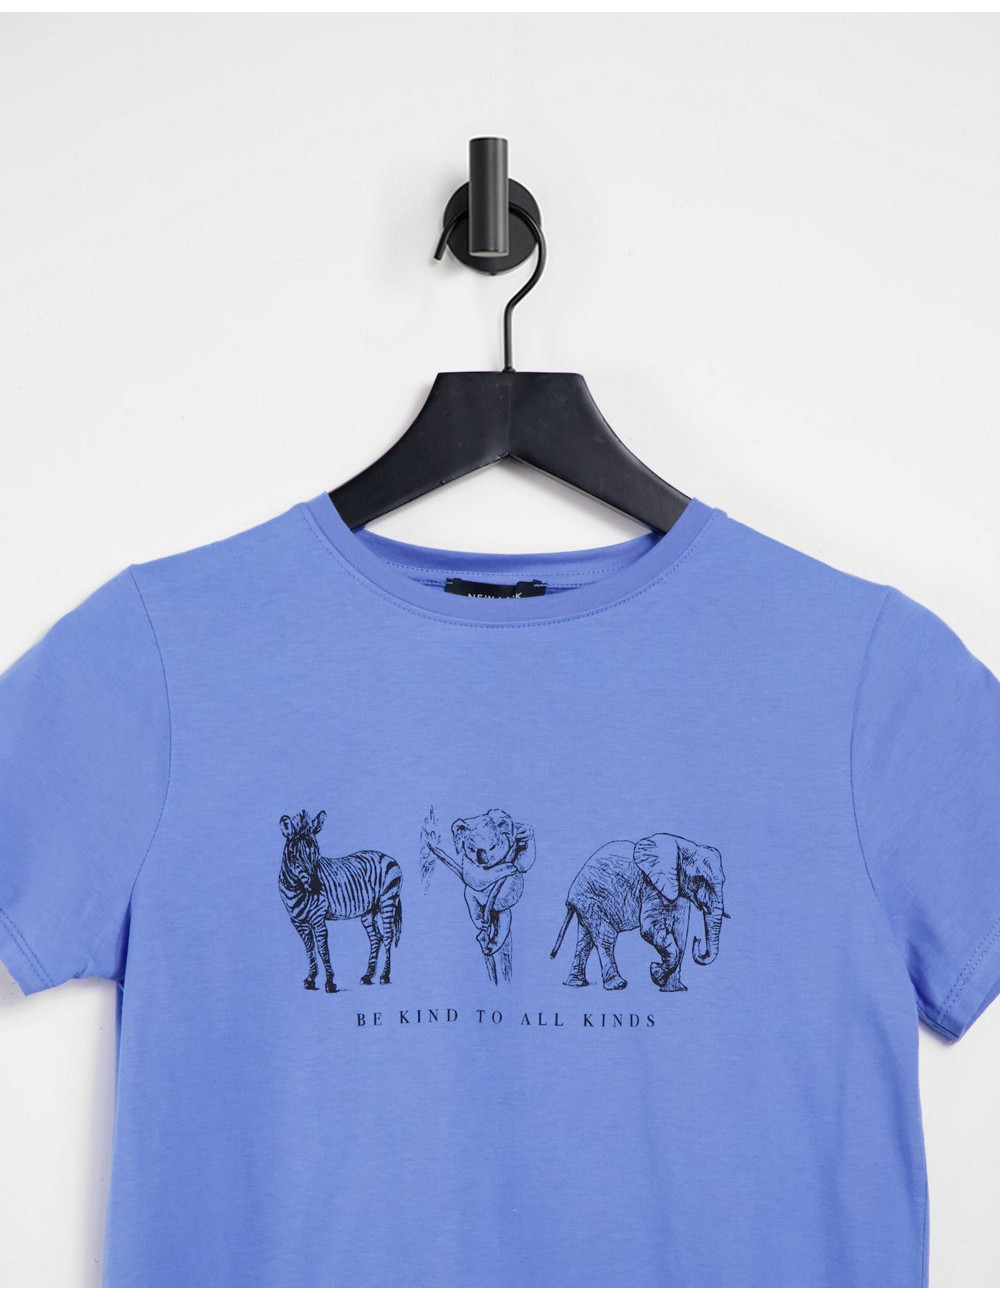 New Look be kind tee in blue